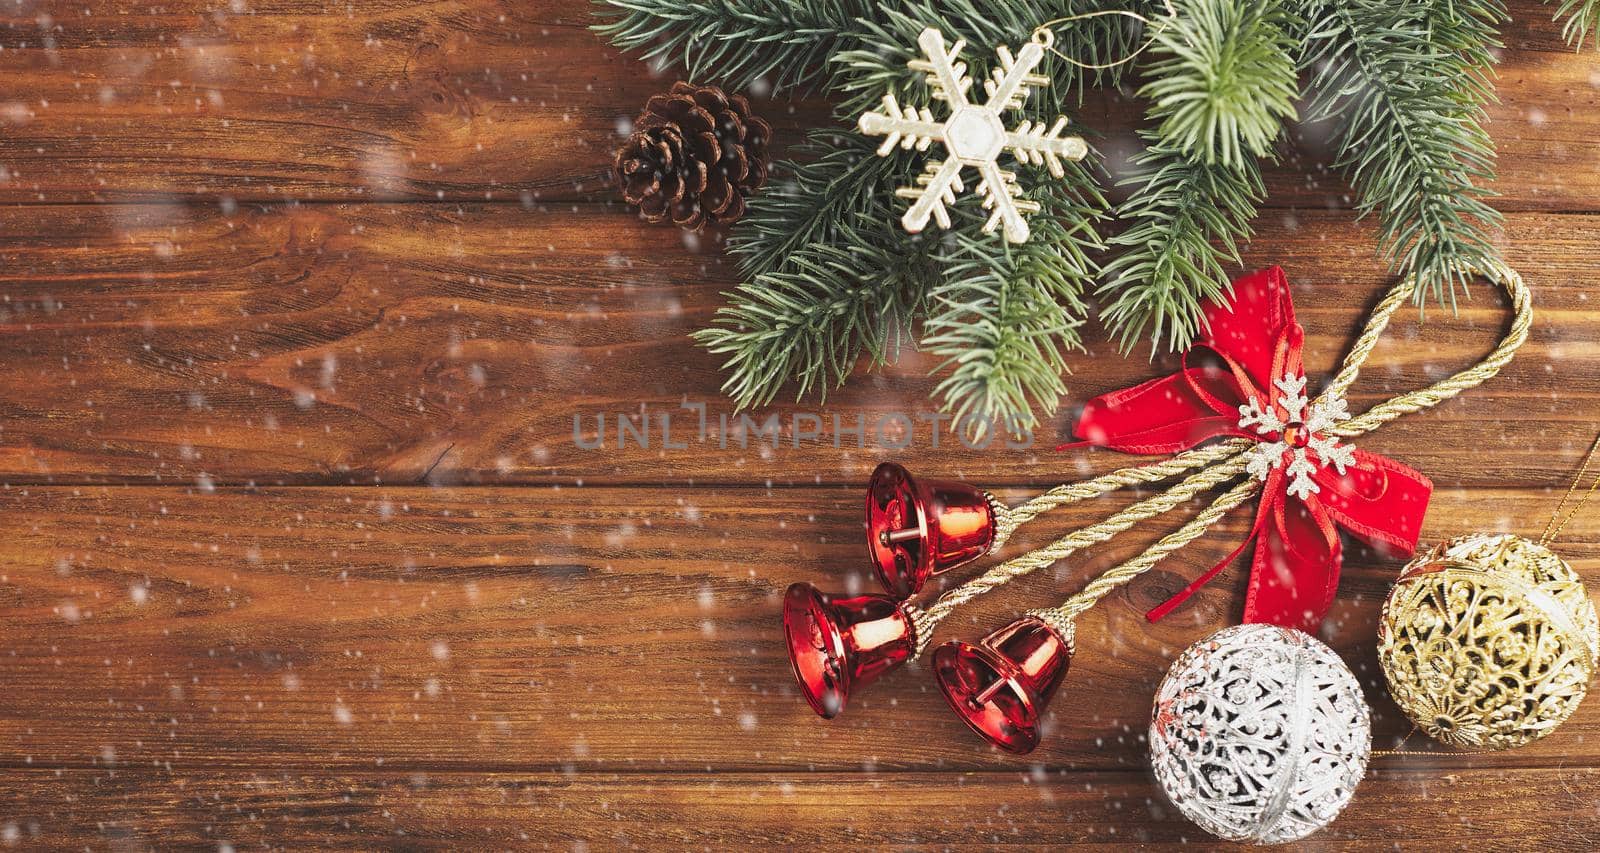 Merry christmas card.  Christmas concept, New Year gifts. Copy space framed by Christmas tree branches, decorations, sweets. by Maximusnd